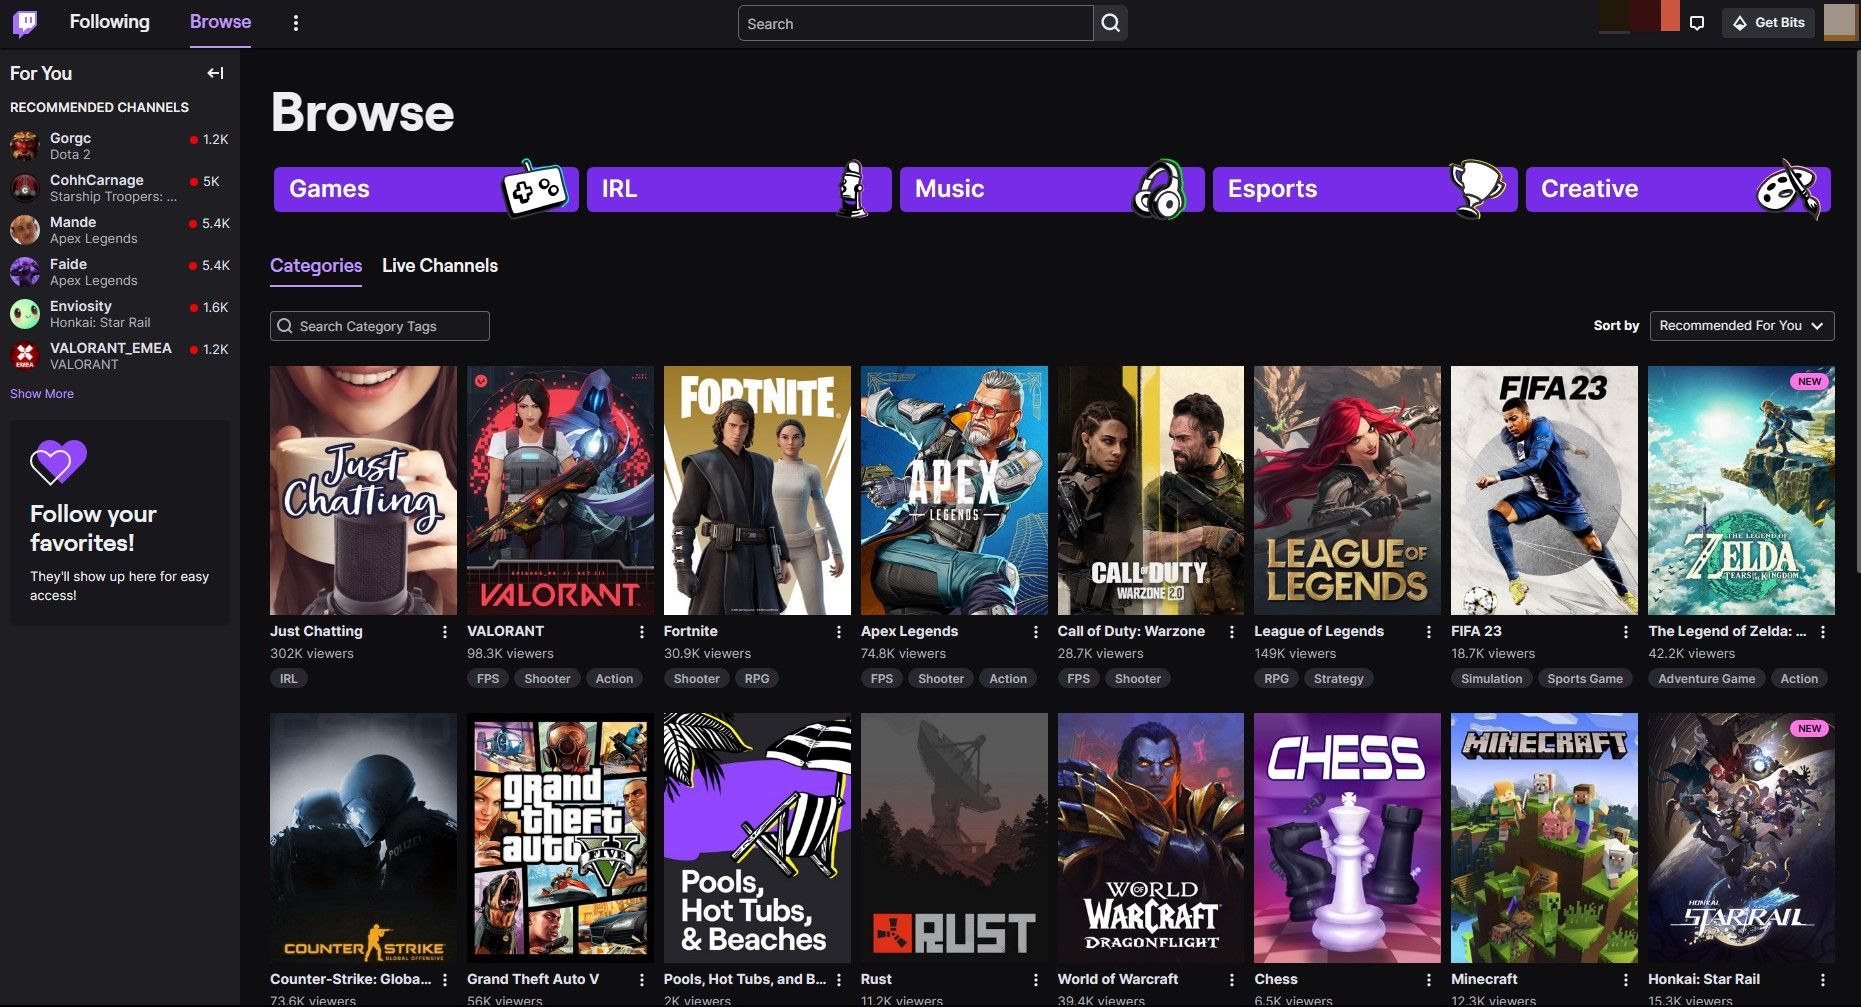 The Browse Page on Twitch